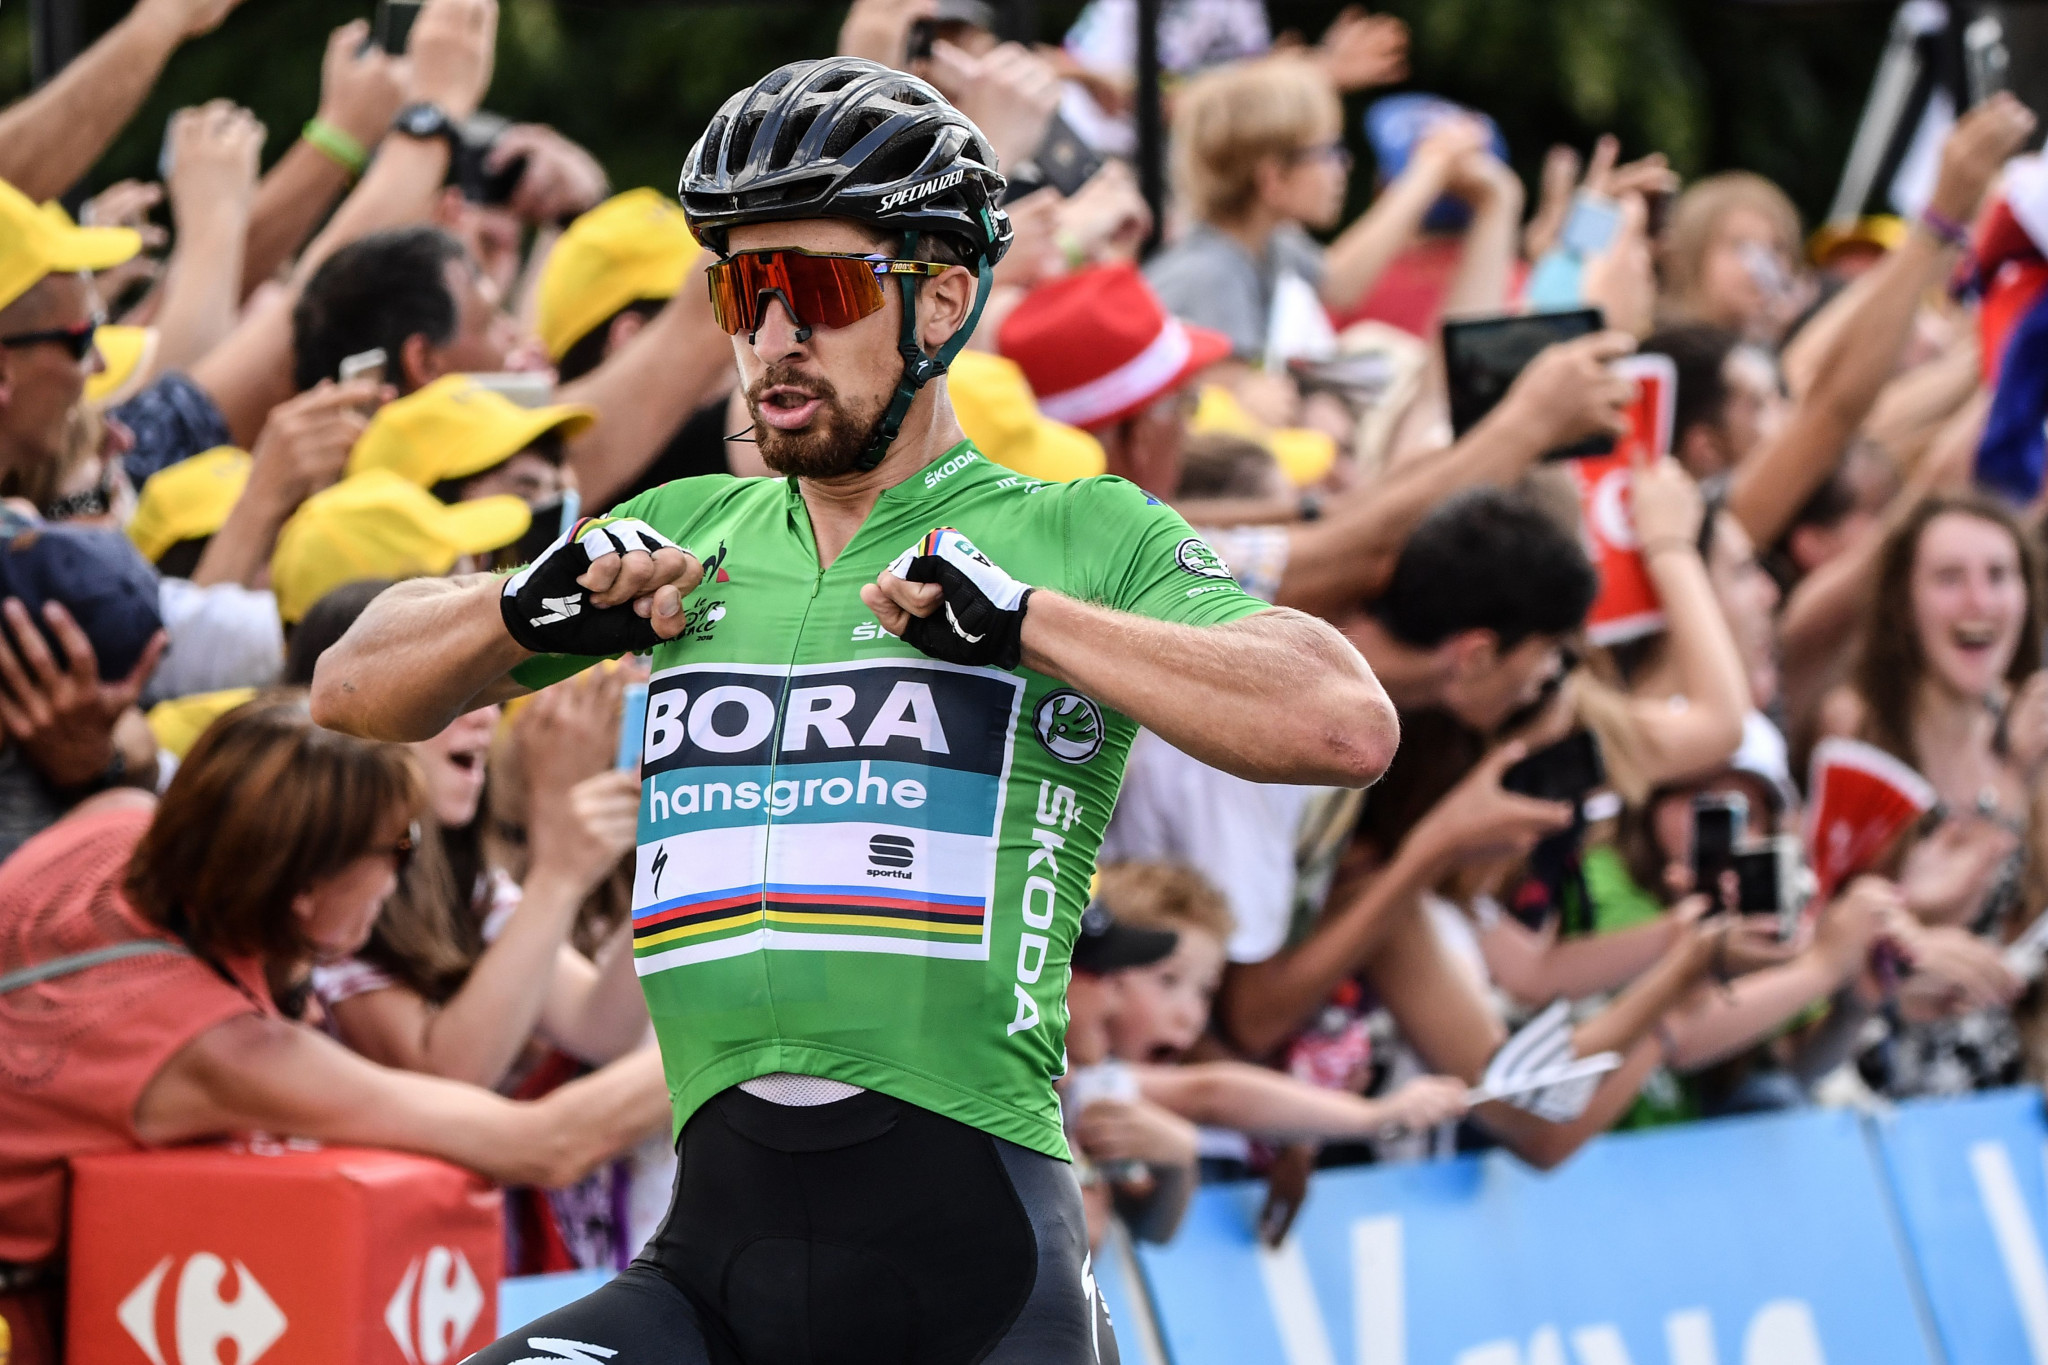 Sagan wins uphill sprint to take second Tour de France stage